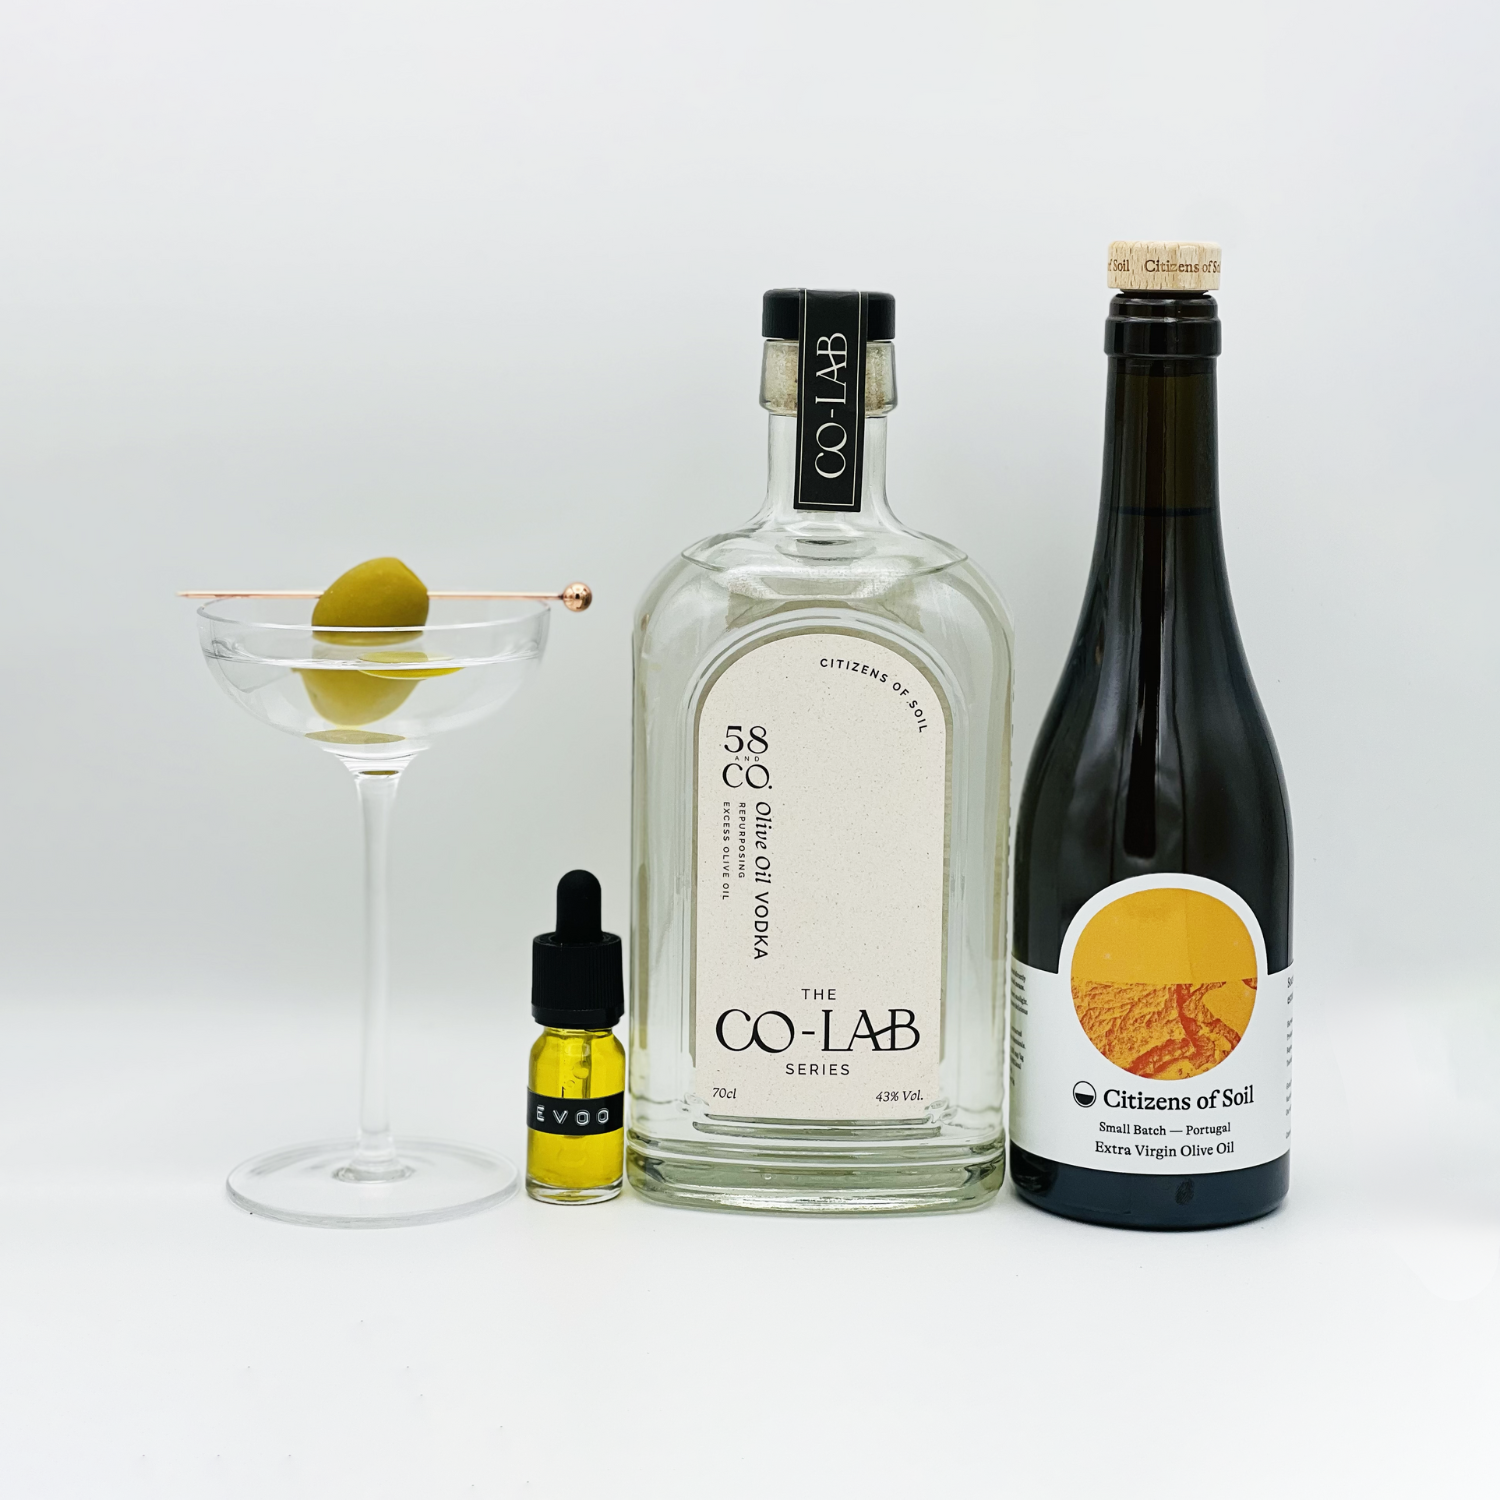 Olive Oil Vodka Martini, small bottle of extra virgin olive oil, bottle of 58 and CO CO-LAB Olive Oil Vodka and bottle of Citizens of Soil olive oil